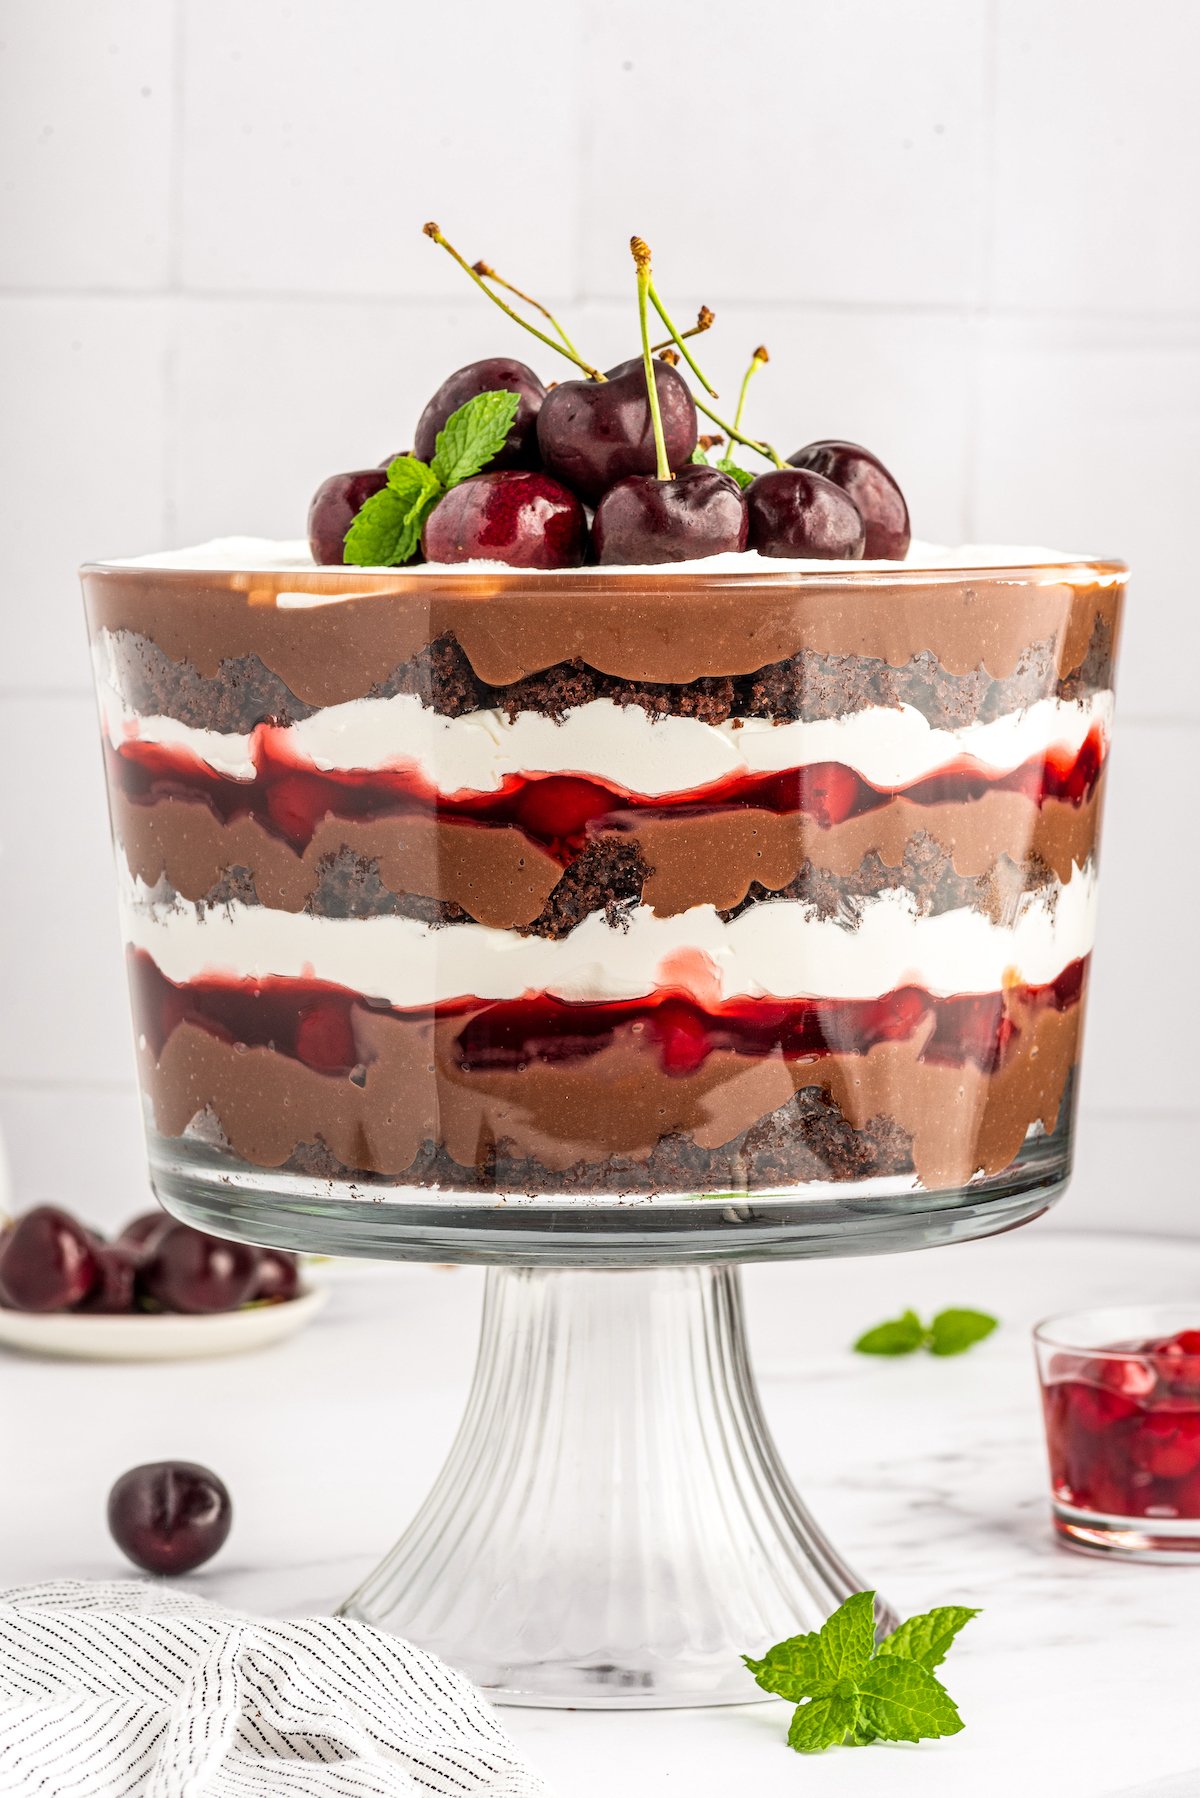 A layered trifle made with chocolate and cherries.